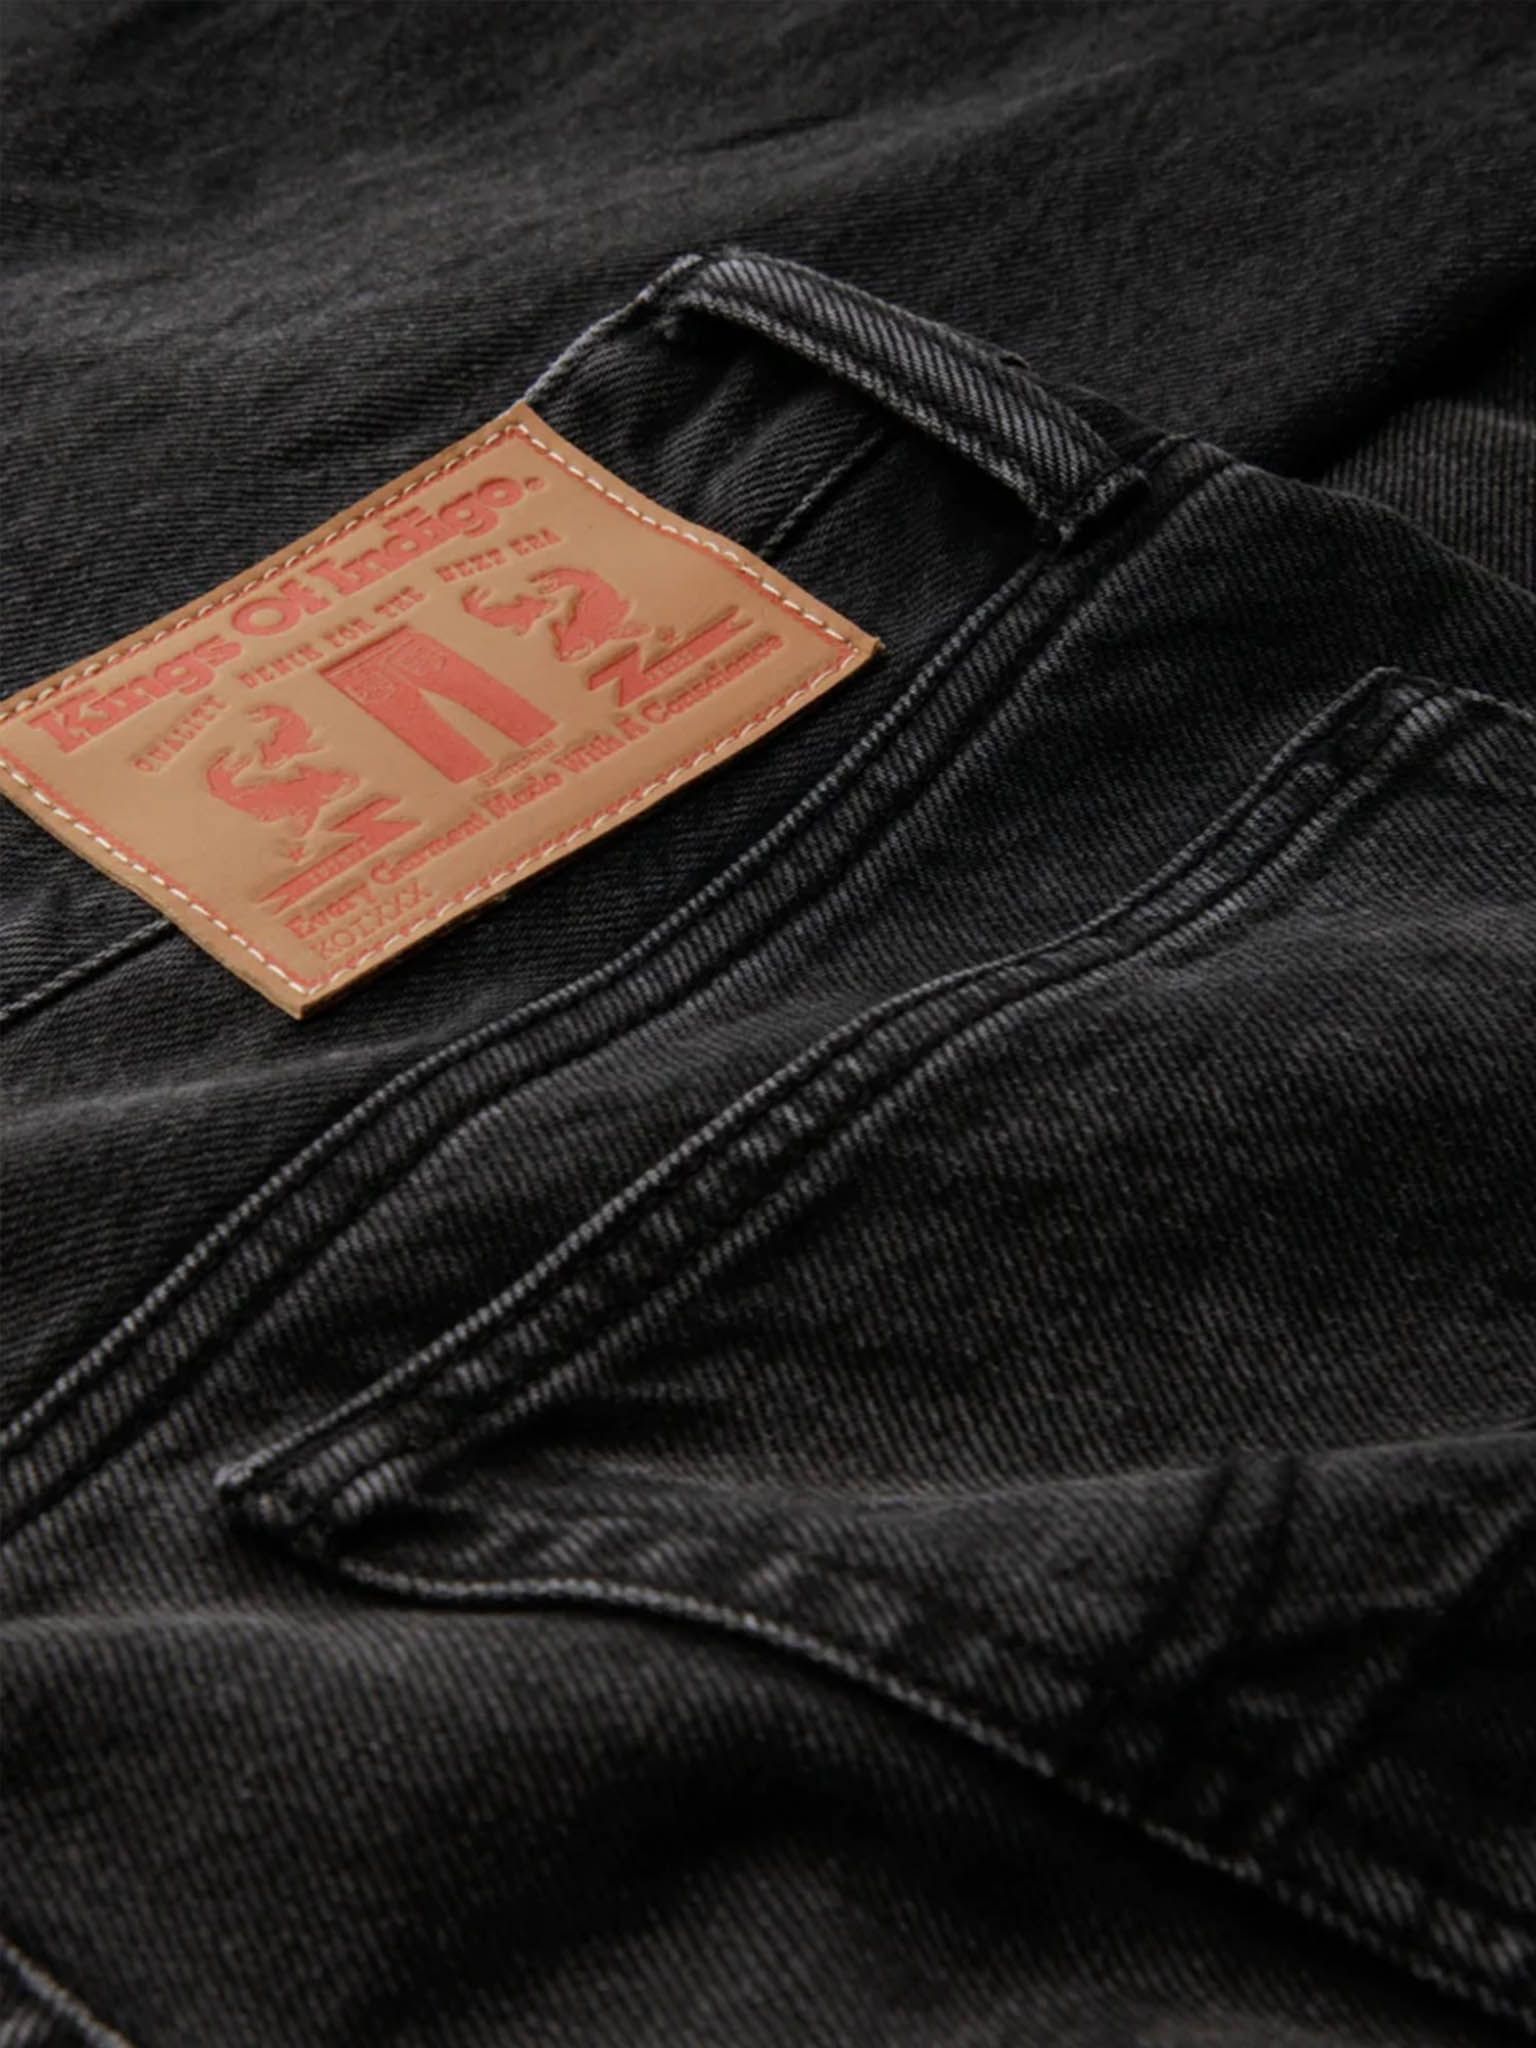 Kings of Indigo Jerrick Recycled Night Jeans close up of brand patch on the waist at back.